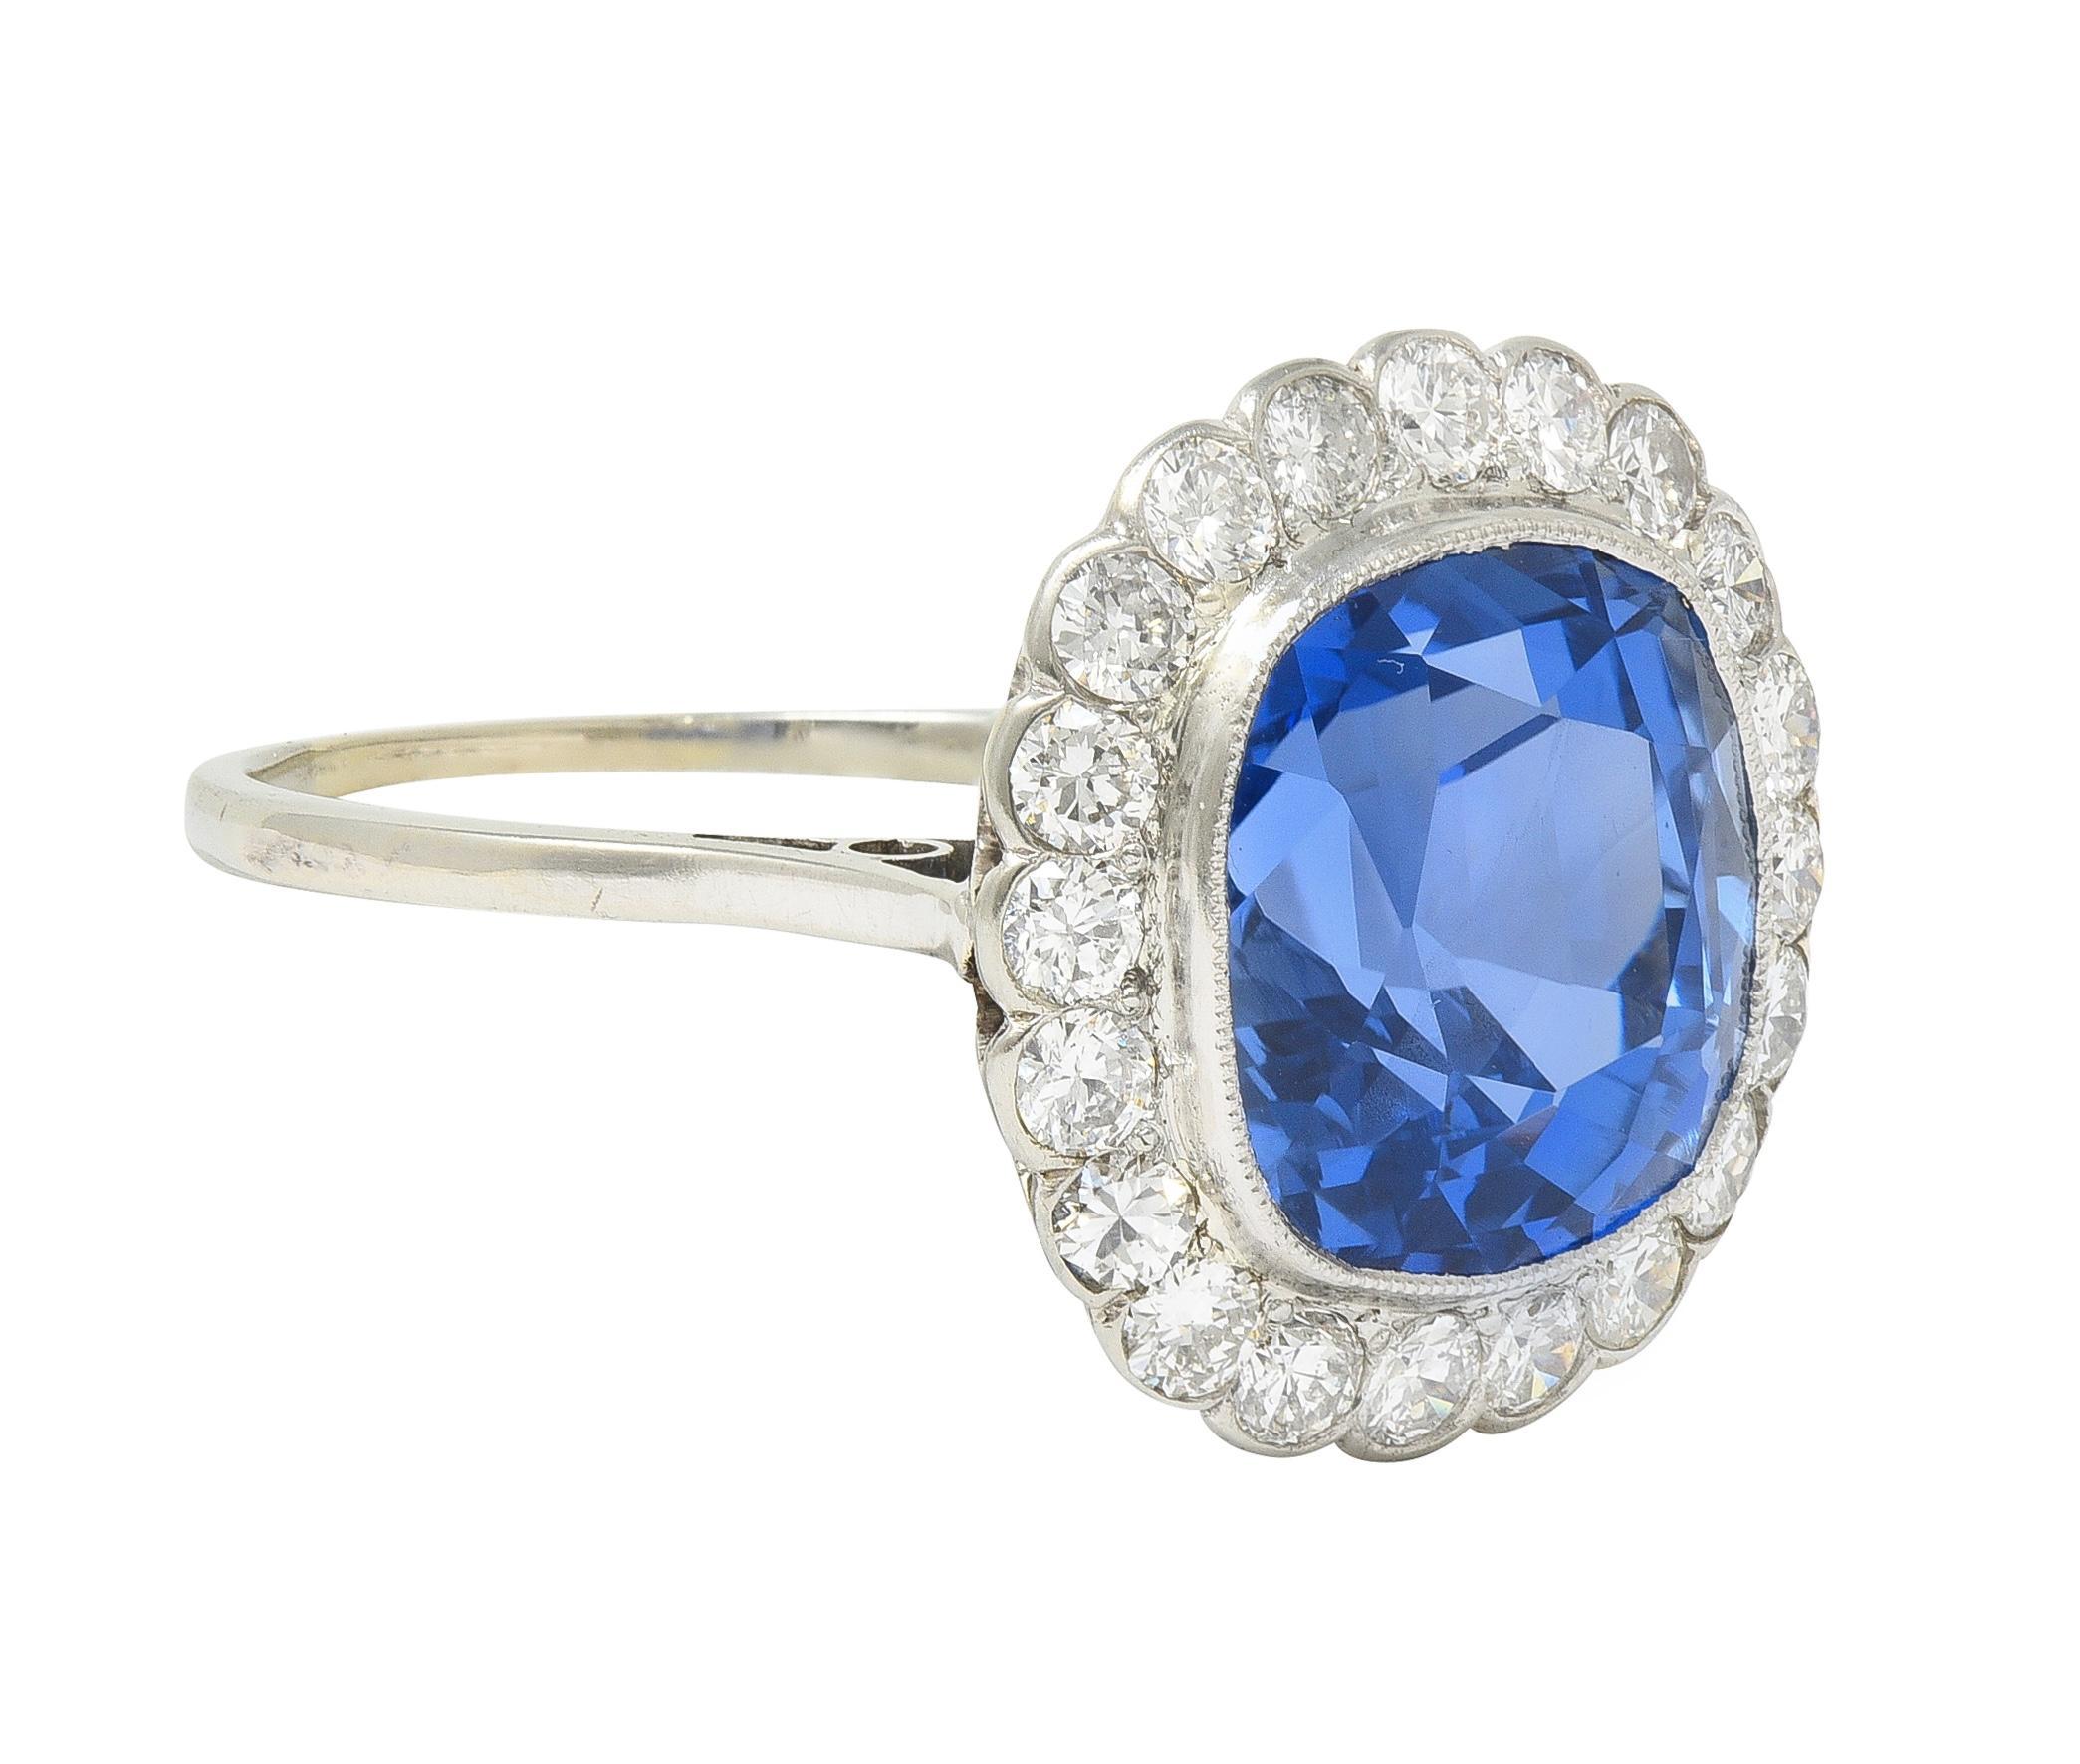 Centering a cushion-shaped mixed-cut sapphire weighing approximately 8.87 carats 
Natural Ceylon in origin with no indications of heat treatment - transparent medium blue
Bezel set with a halo surround of old European cut diamonds 
Weighing